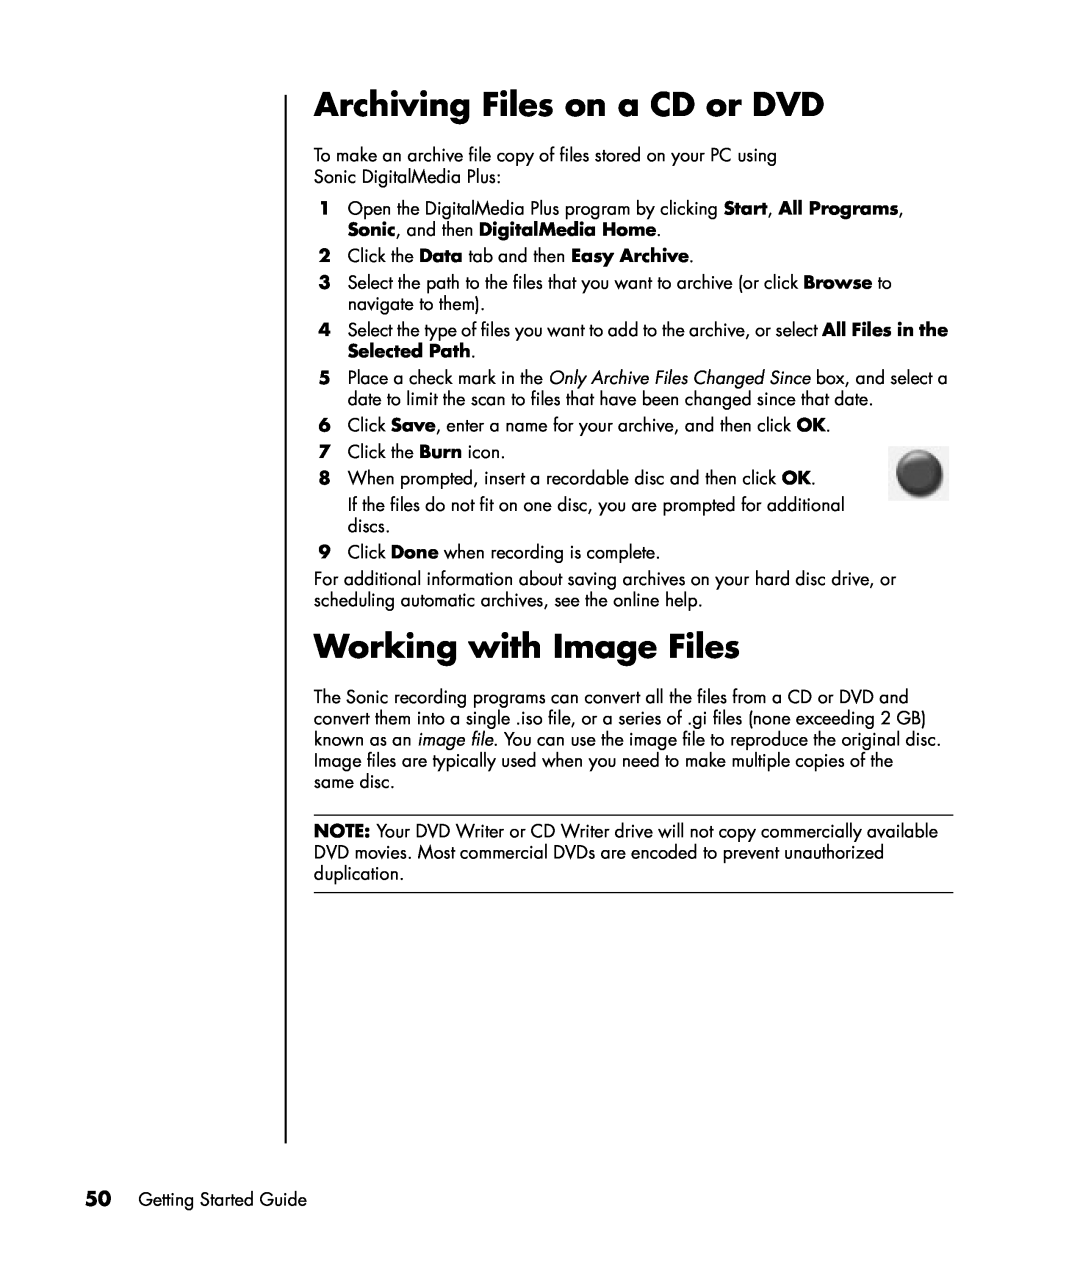 HP SR1502HM, SR1520NX, SR1519X, SR1522X, SR1514NX, SR1510NX, SR1511NX Archiving Files on a CD or DVD, Working with Image Files 